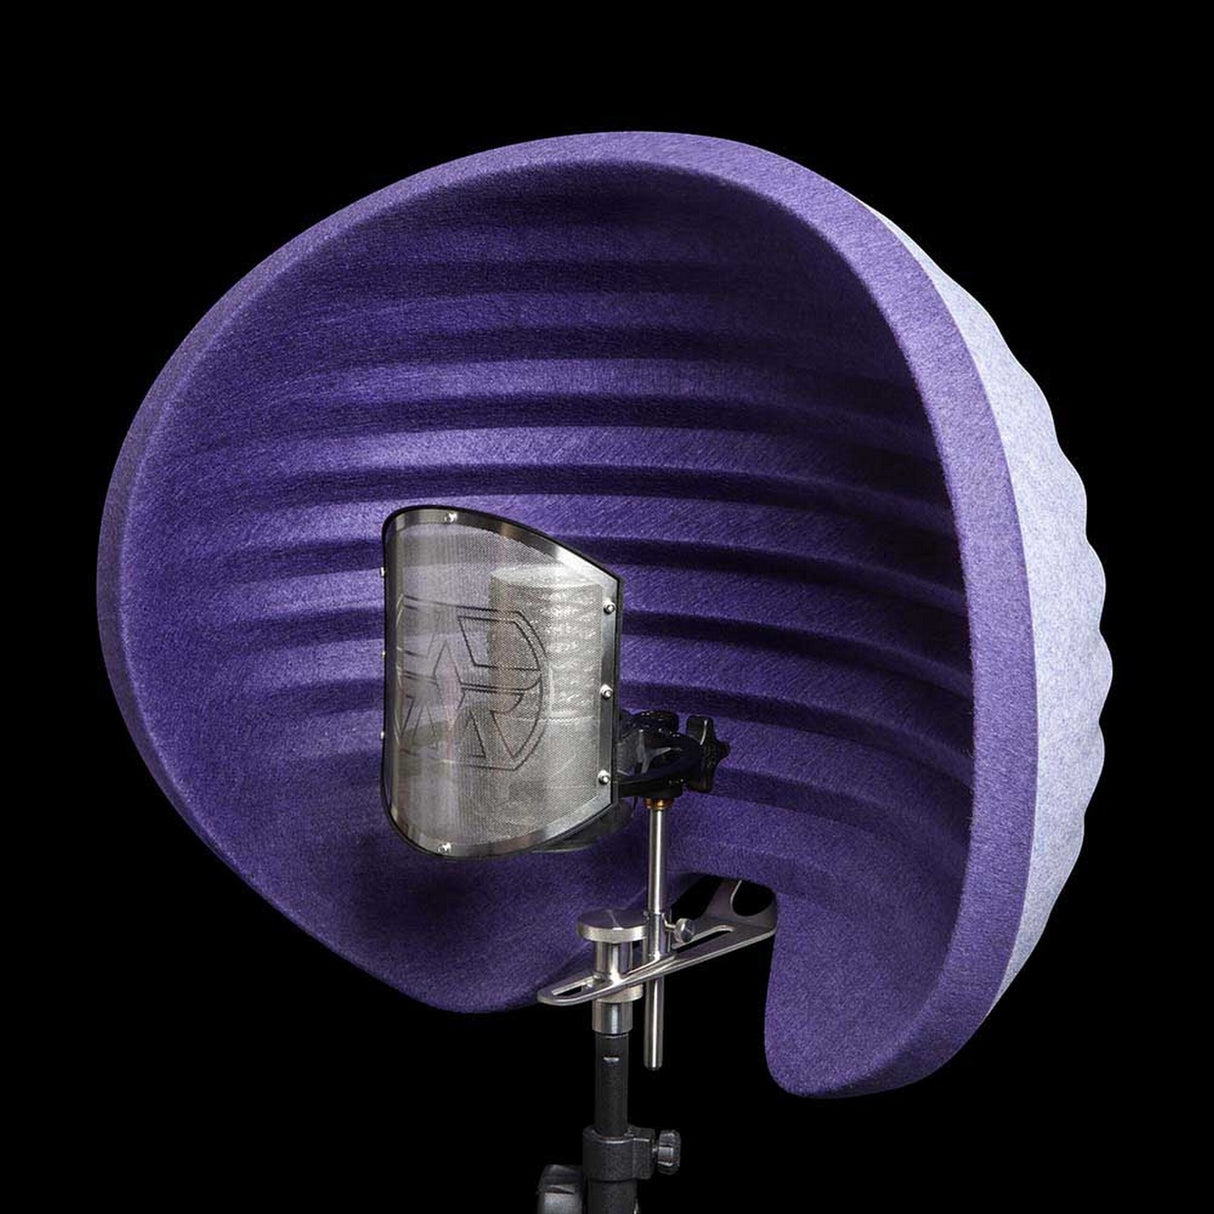 Aston Microphones Halo Reflection Filter and Portable Vocal Booth, Purple